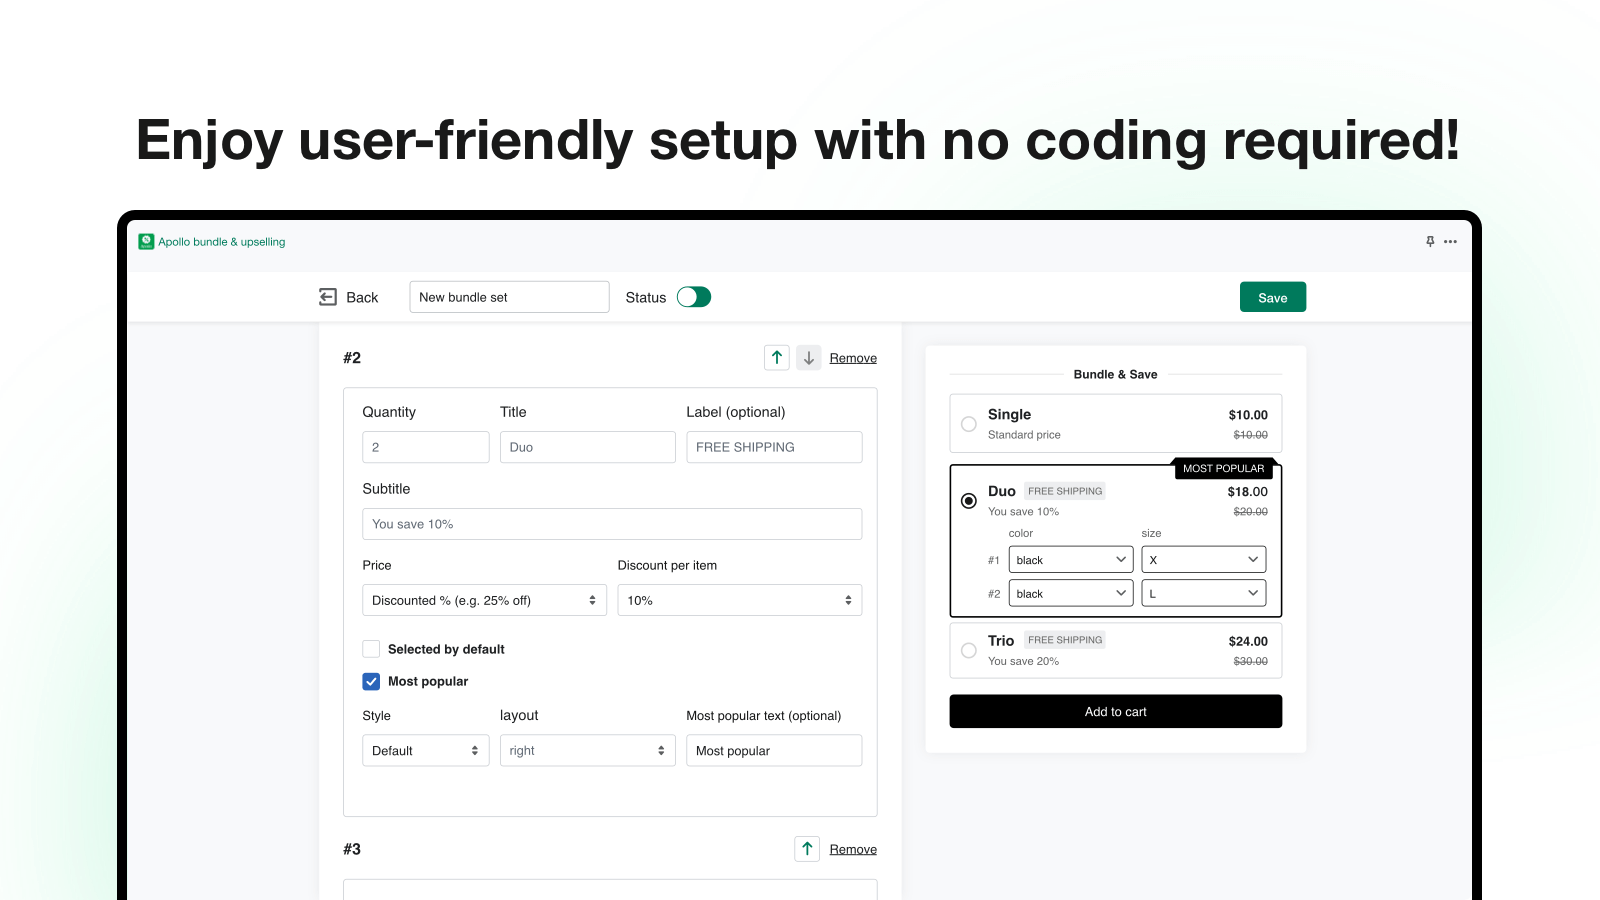 Enjoy user-friendly setup with no coding required!